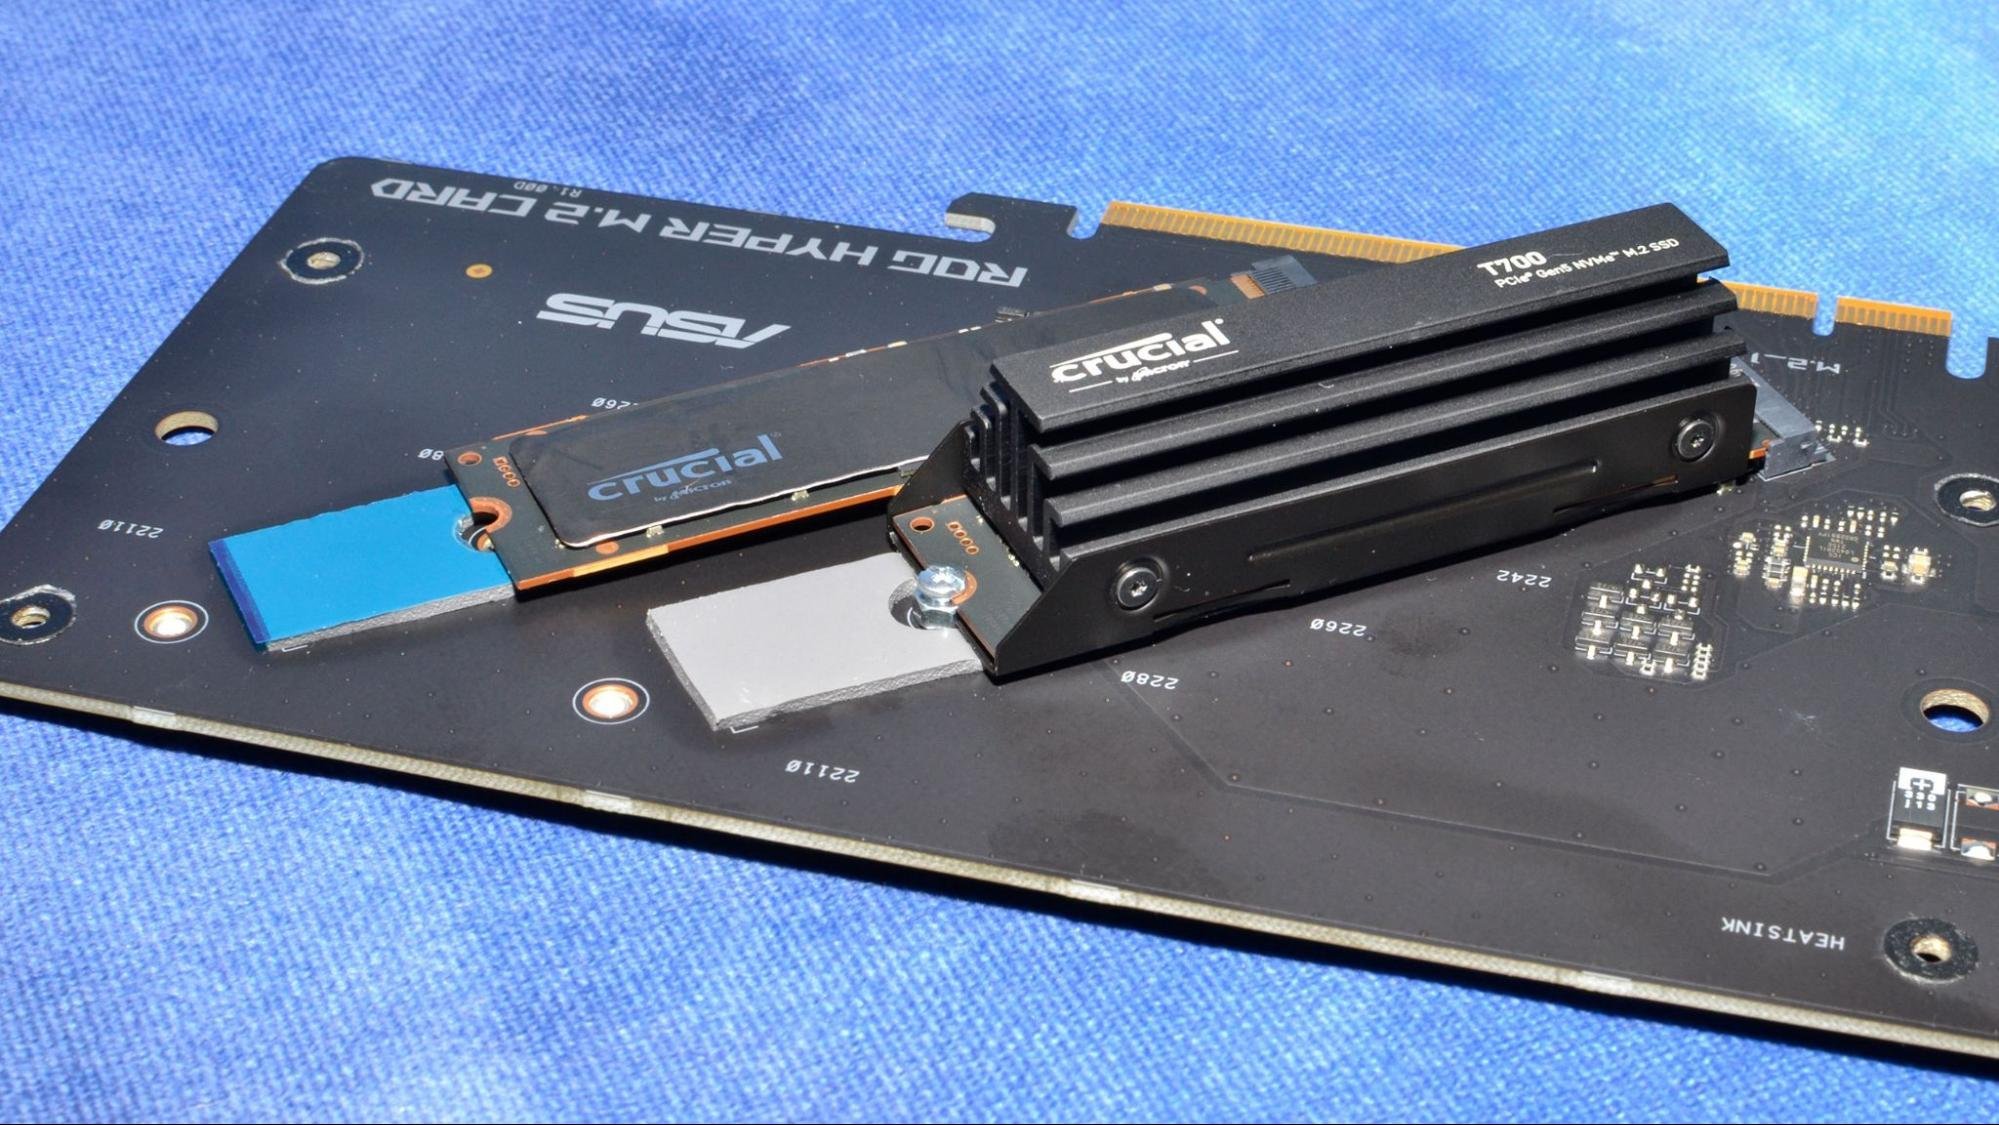 Crucial to launch world’s fastest Gen 5 SSD 